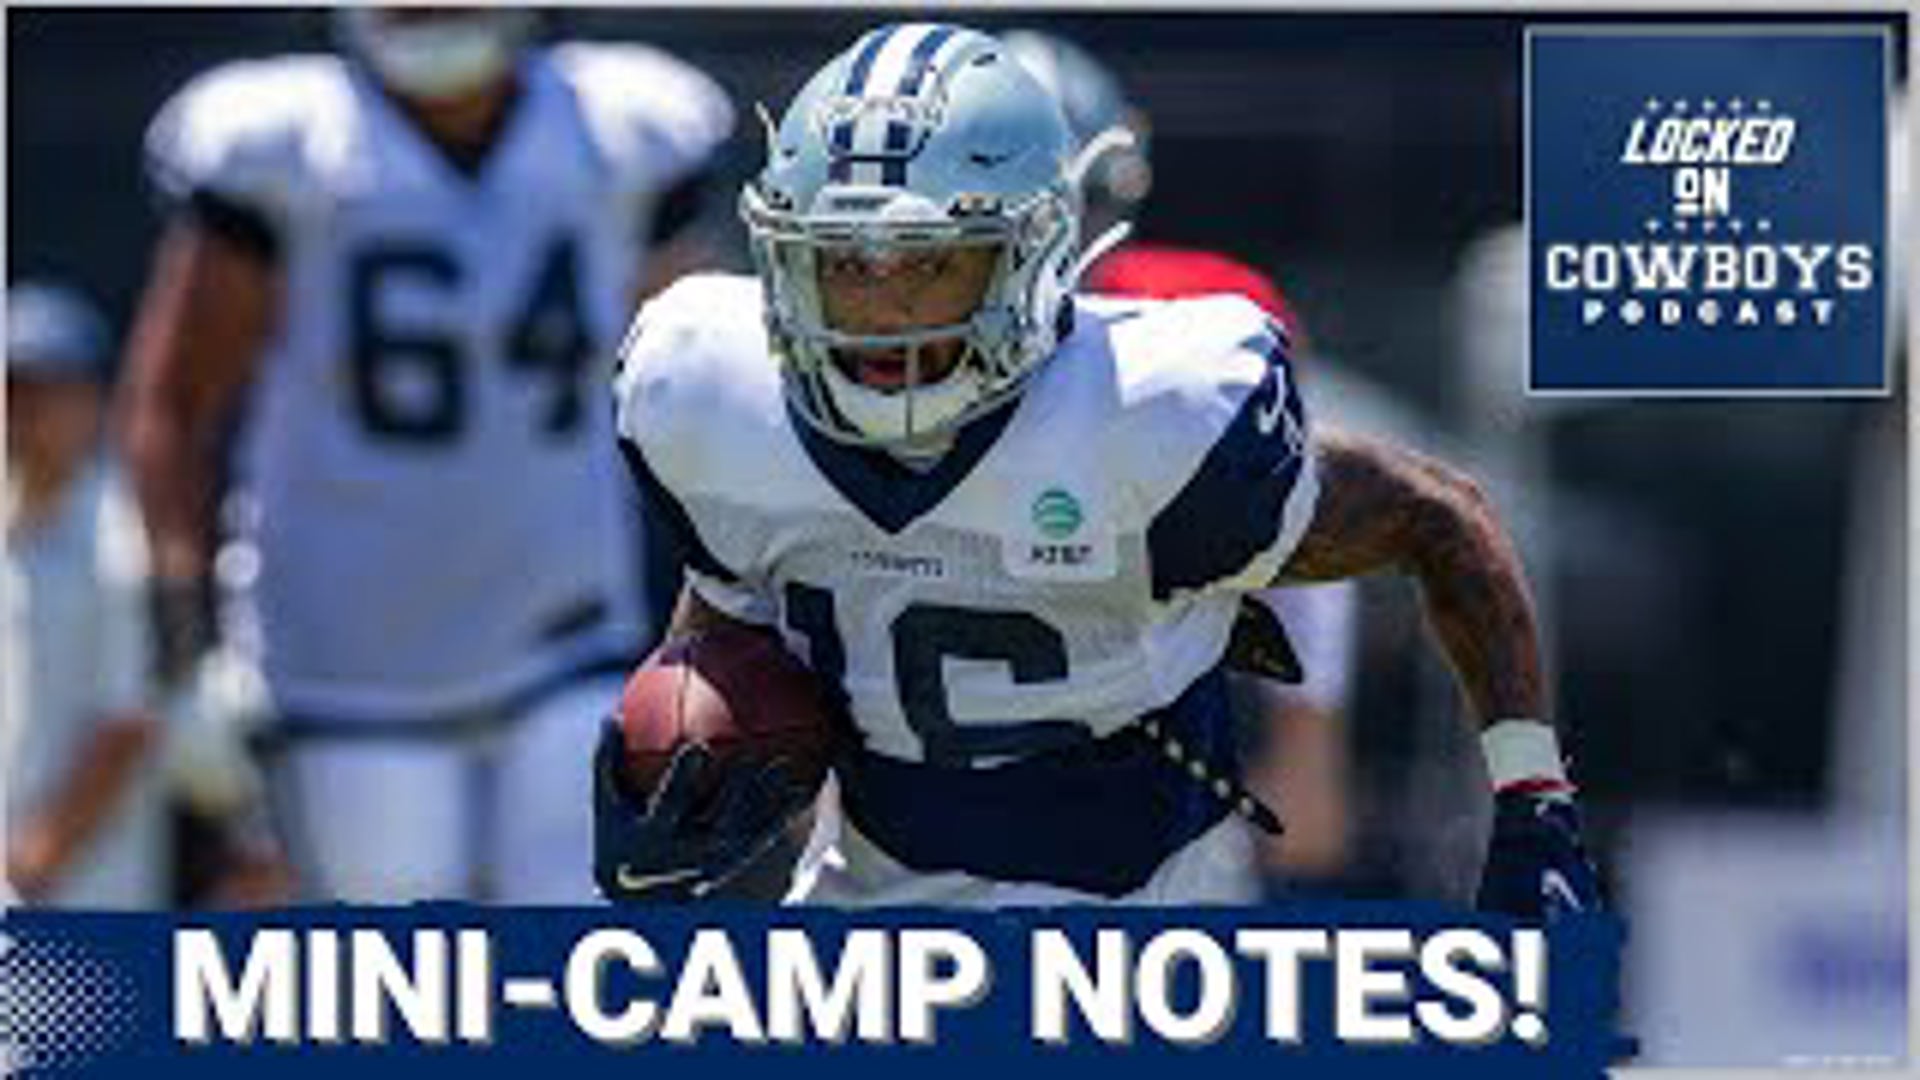 The Dallas Cowboys held their rookie minicamp over the weekend and there were some fascinating tidbits coming out of practice. Where was Cooper Beebe lining up?